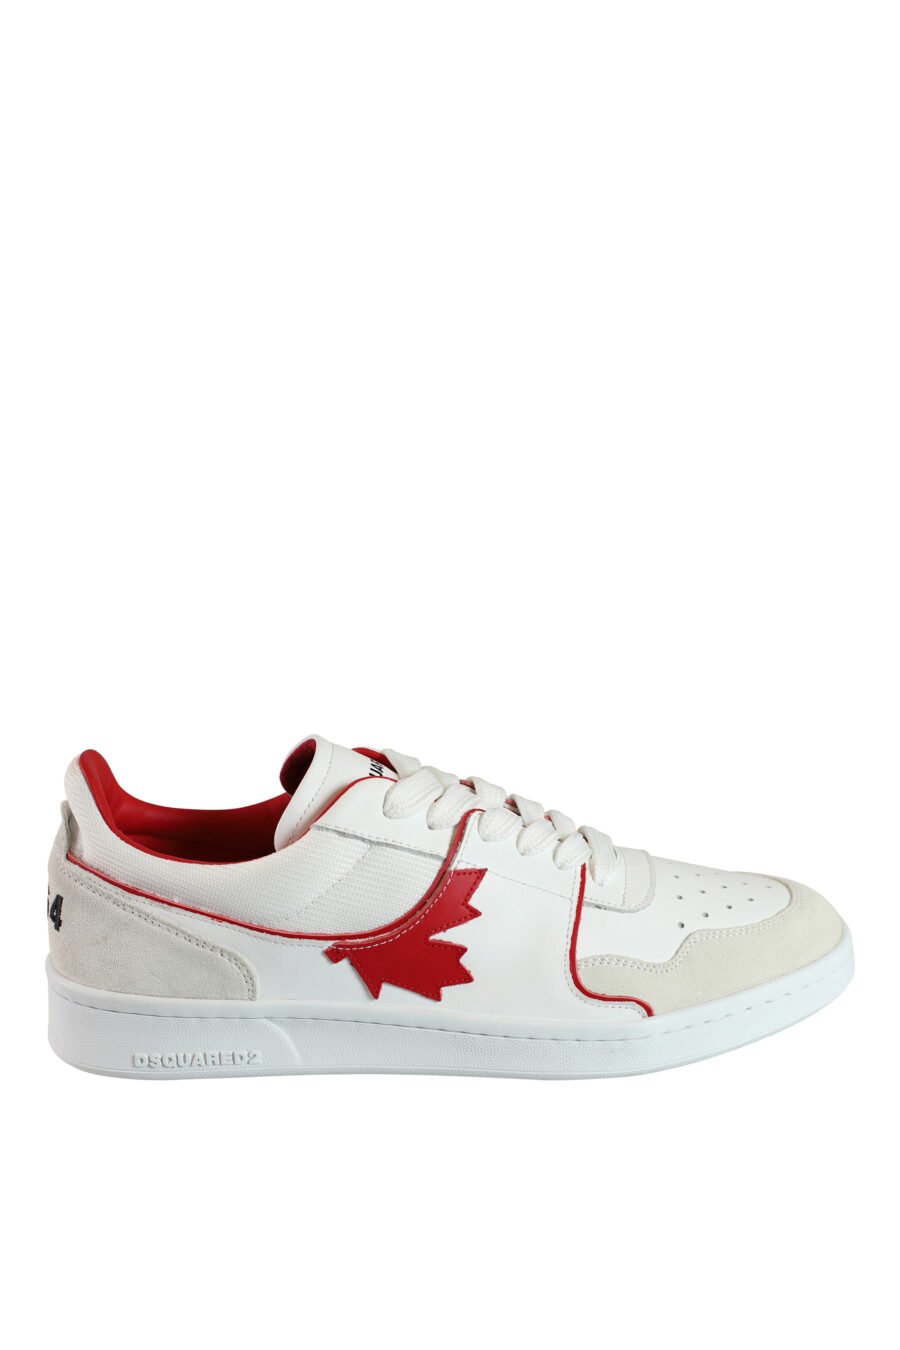 White mix trainers with logo and red details - 8055777188194